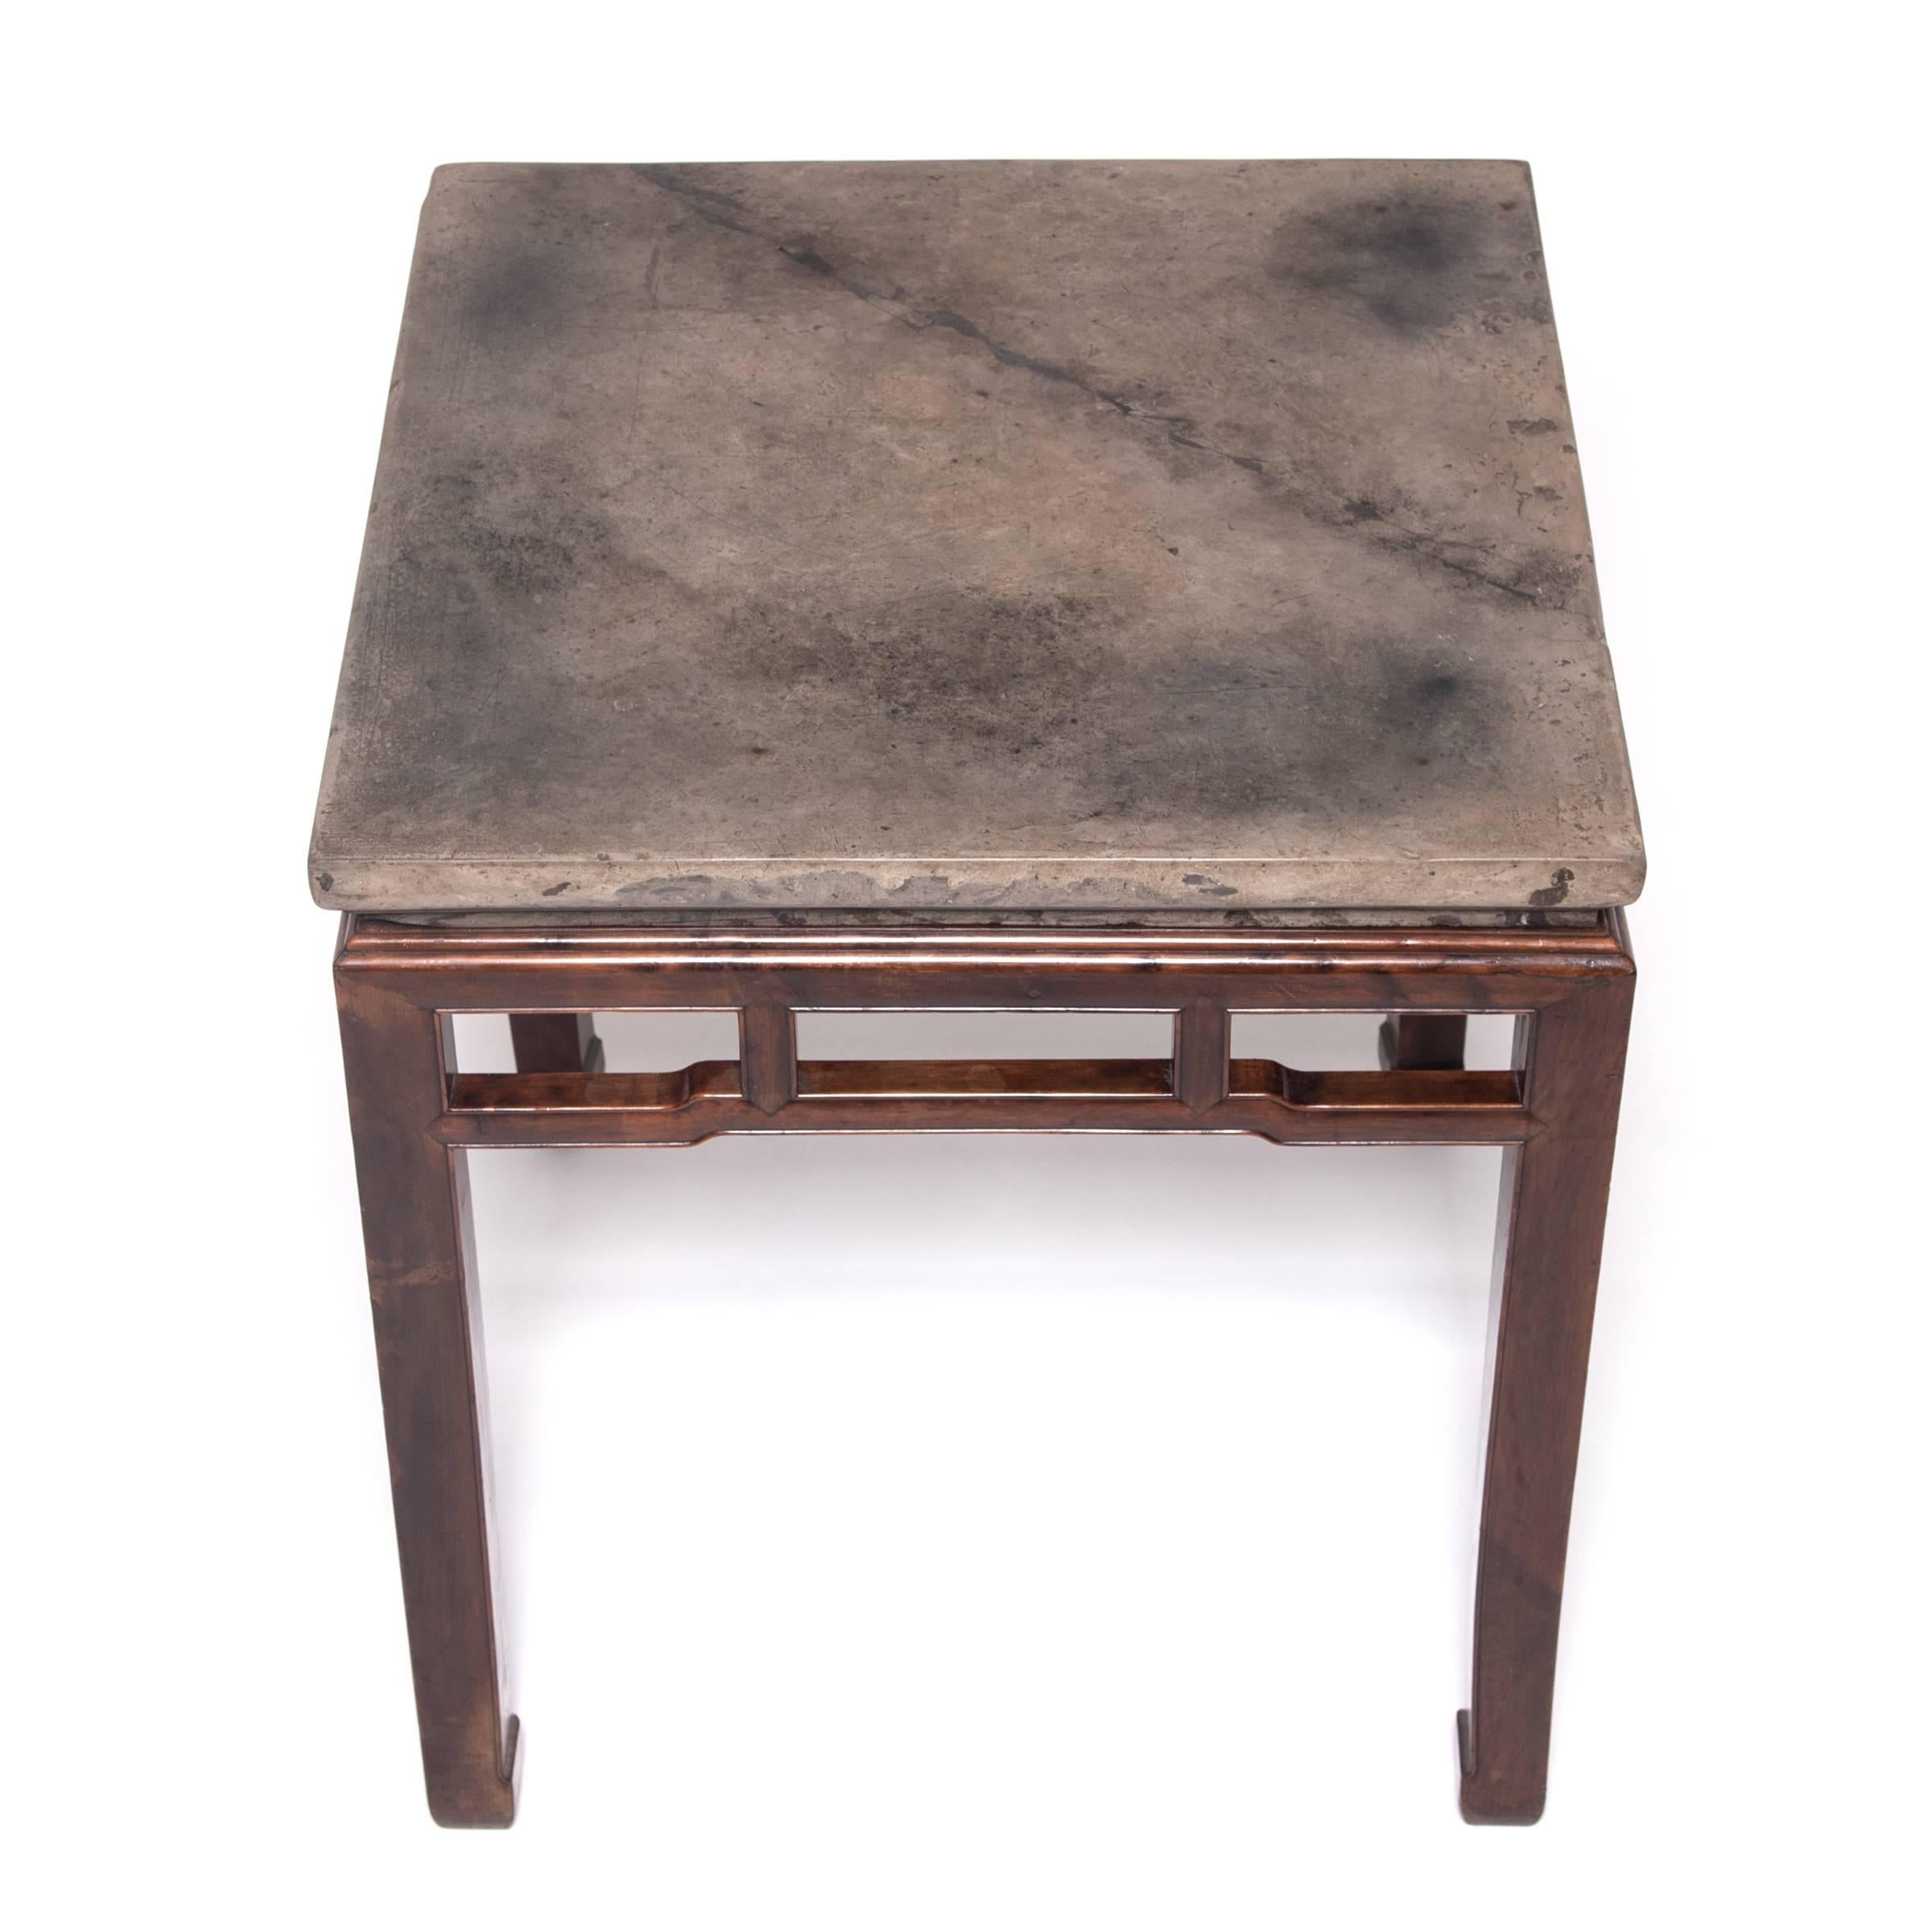 In our 20 years of collecting, we've never come across a late 18th-early 19th century stone top as distinctive as the one on this table. The undercut, decorative-edged stone has aged exquisitely over hundreds of years of use—it was likely used for